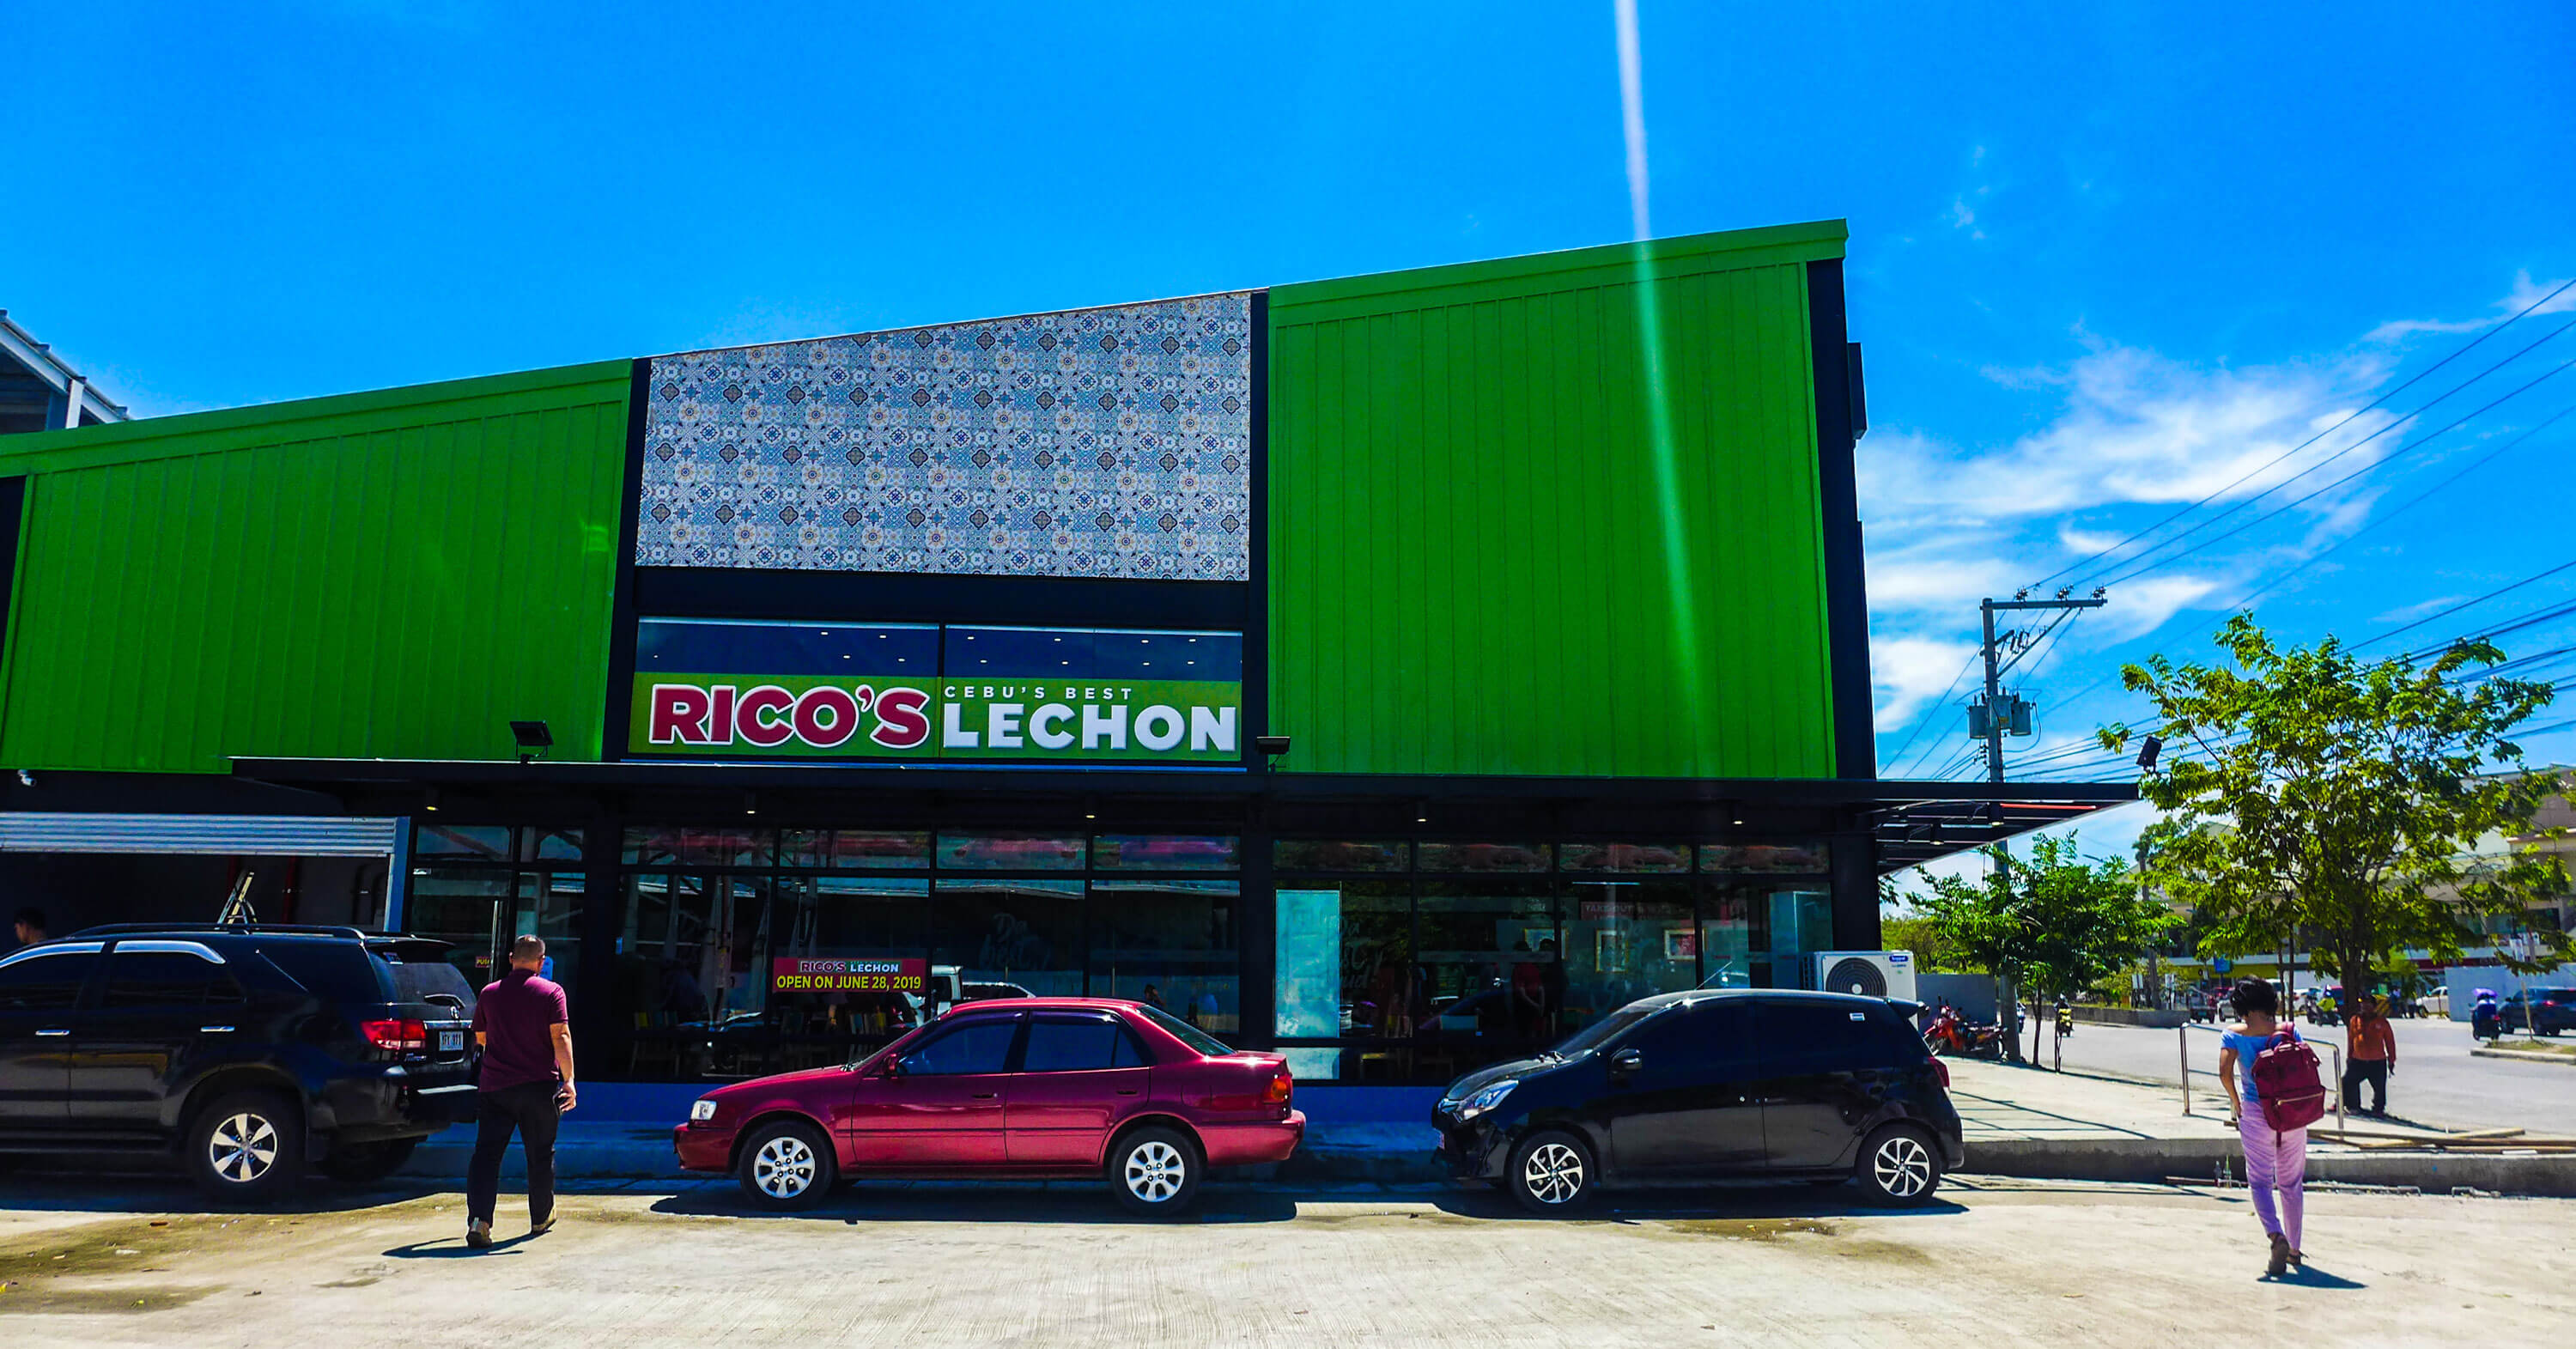 RICO’S LECHON in Mandaue is a 500-square meter branch located at Unit F1 Jamestown, Mantawi International Drive. 